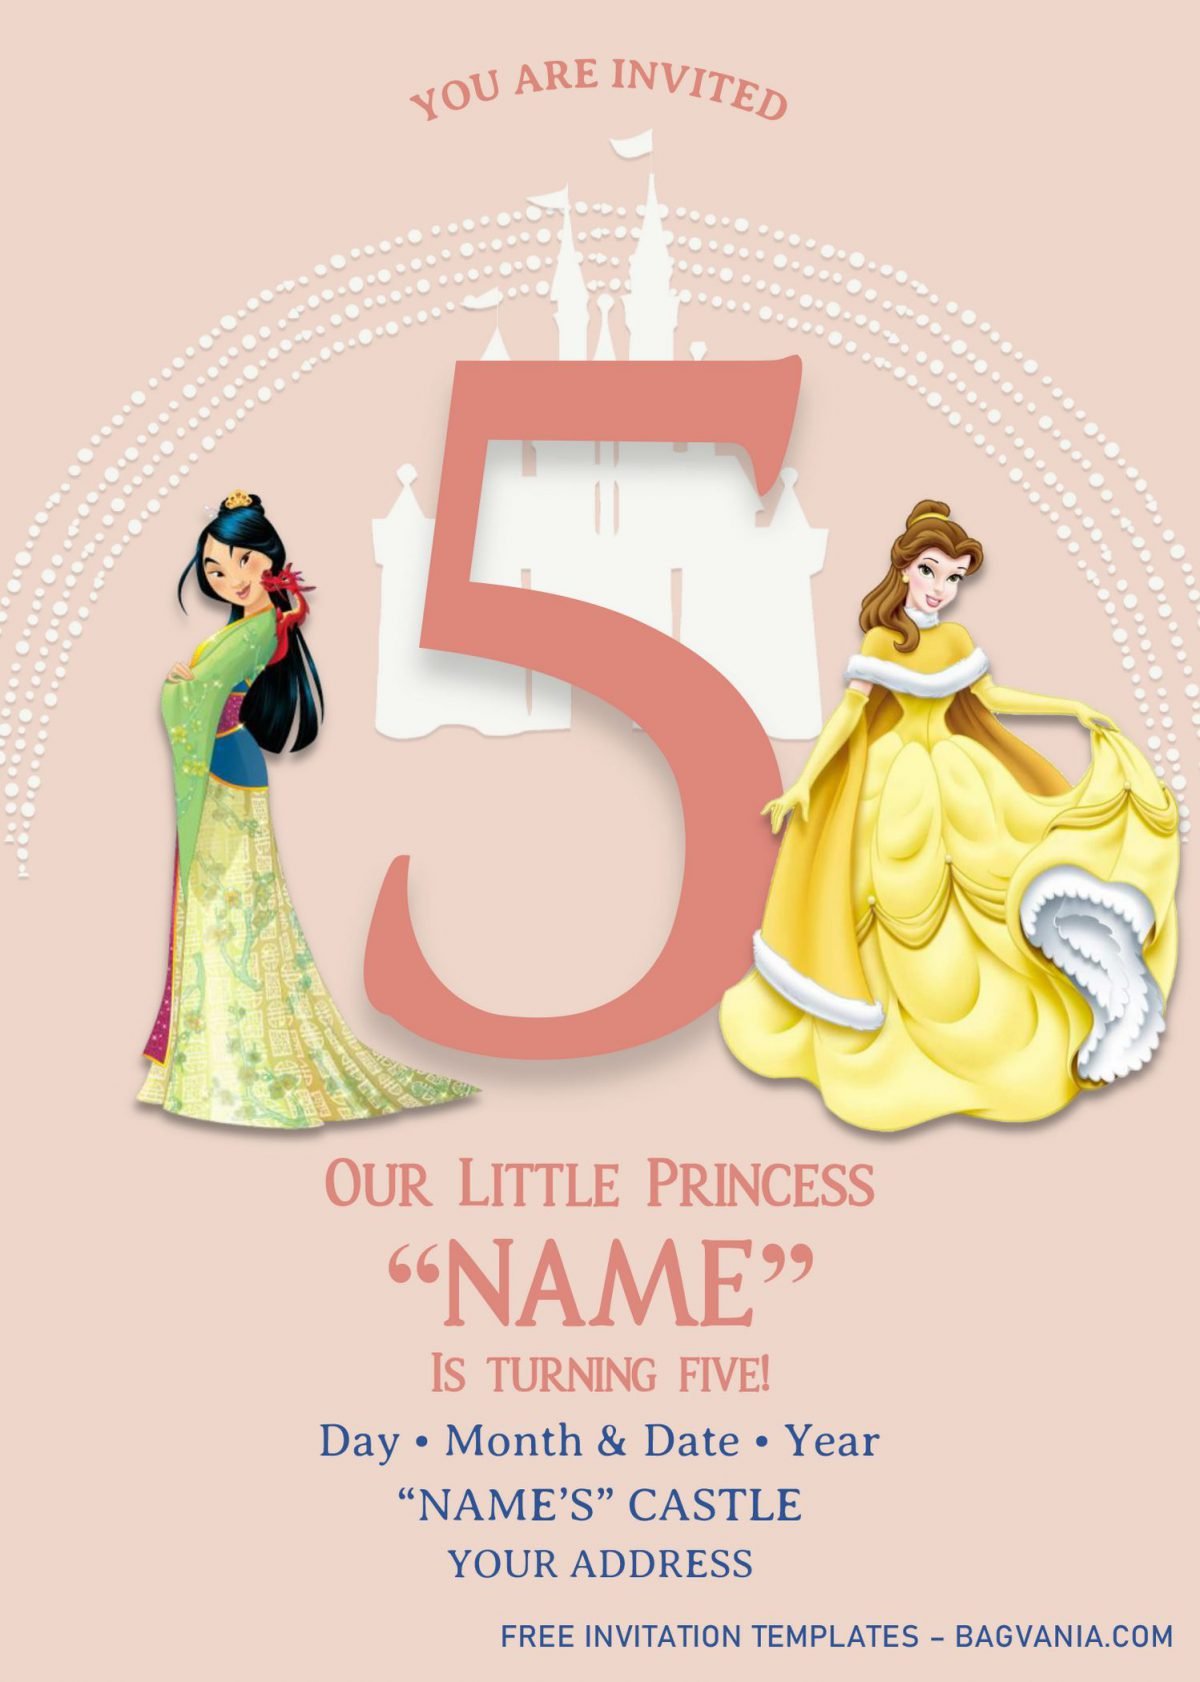 Disney Princess Birthday Invitation Templates - Editable With MS Word and has mulan and belle